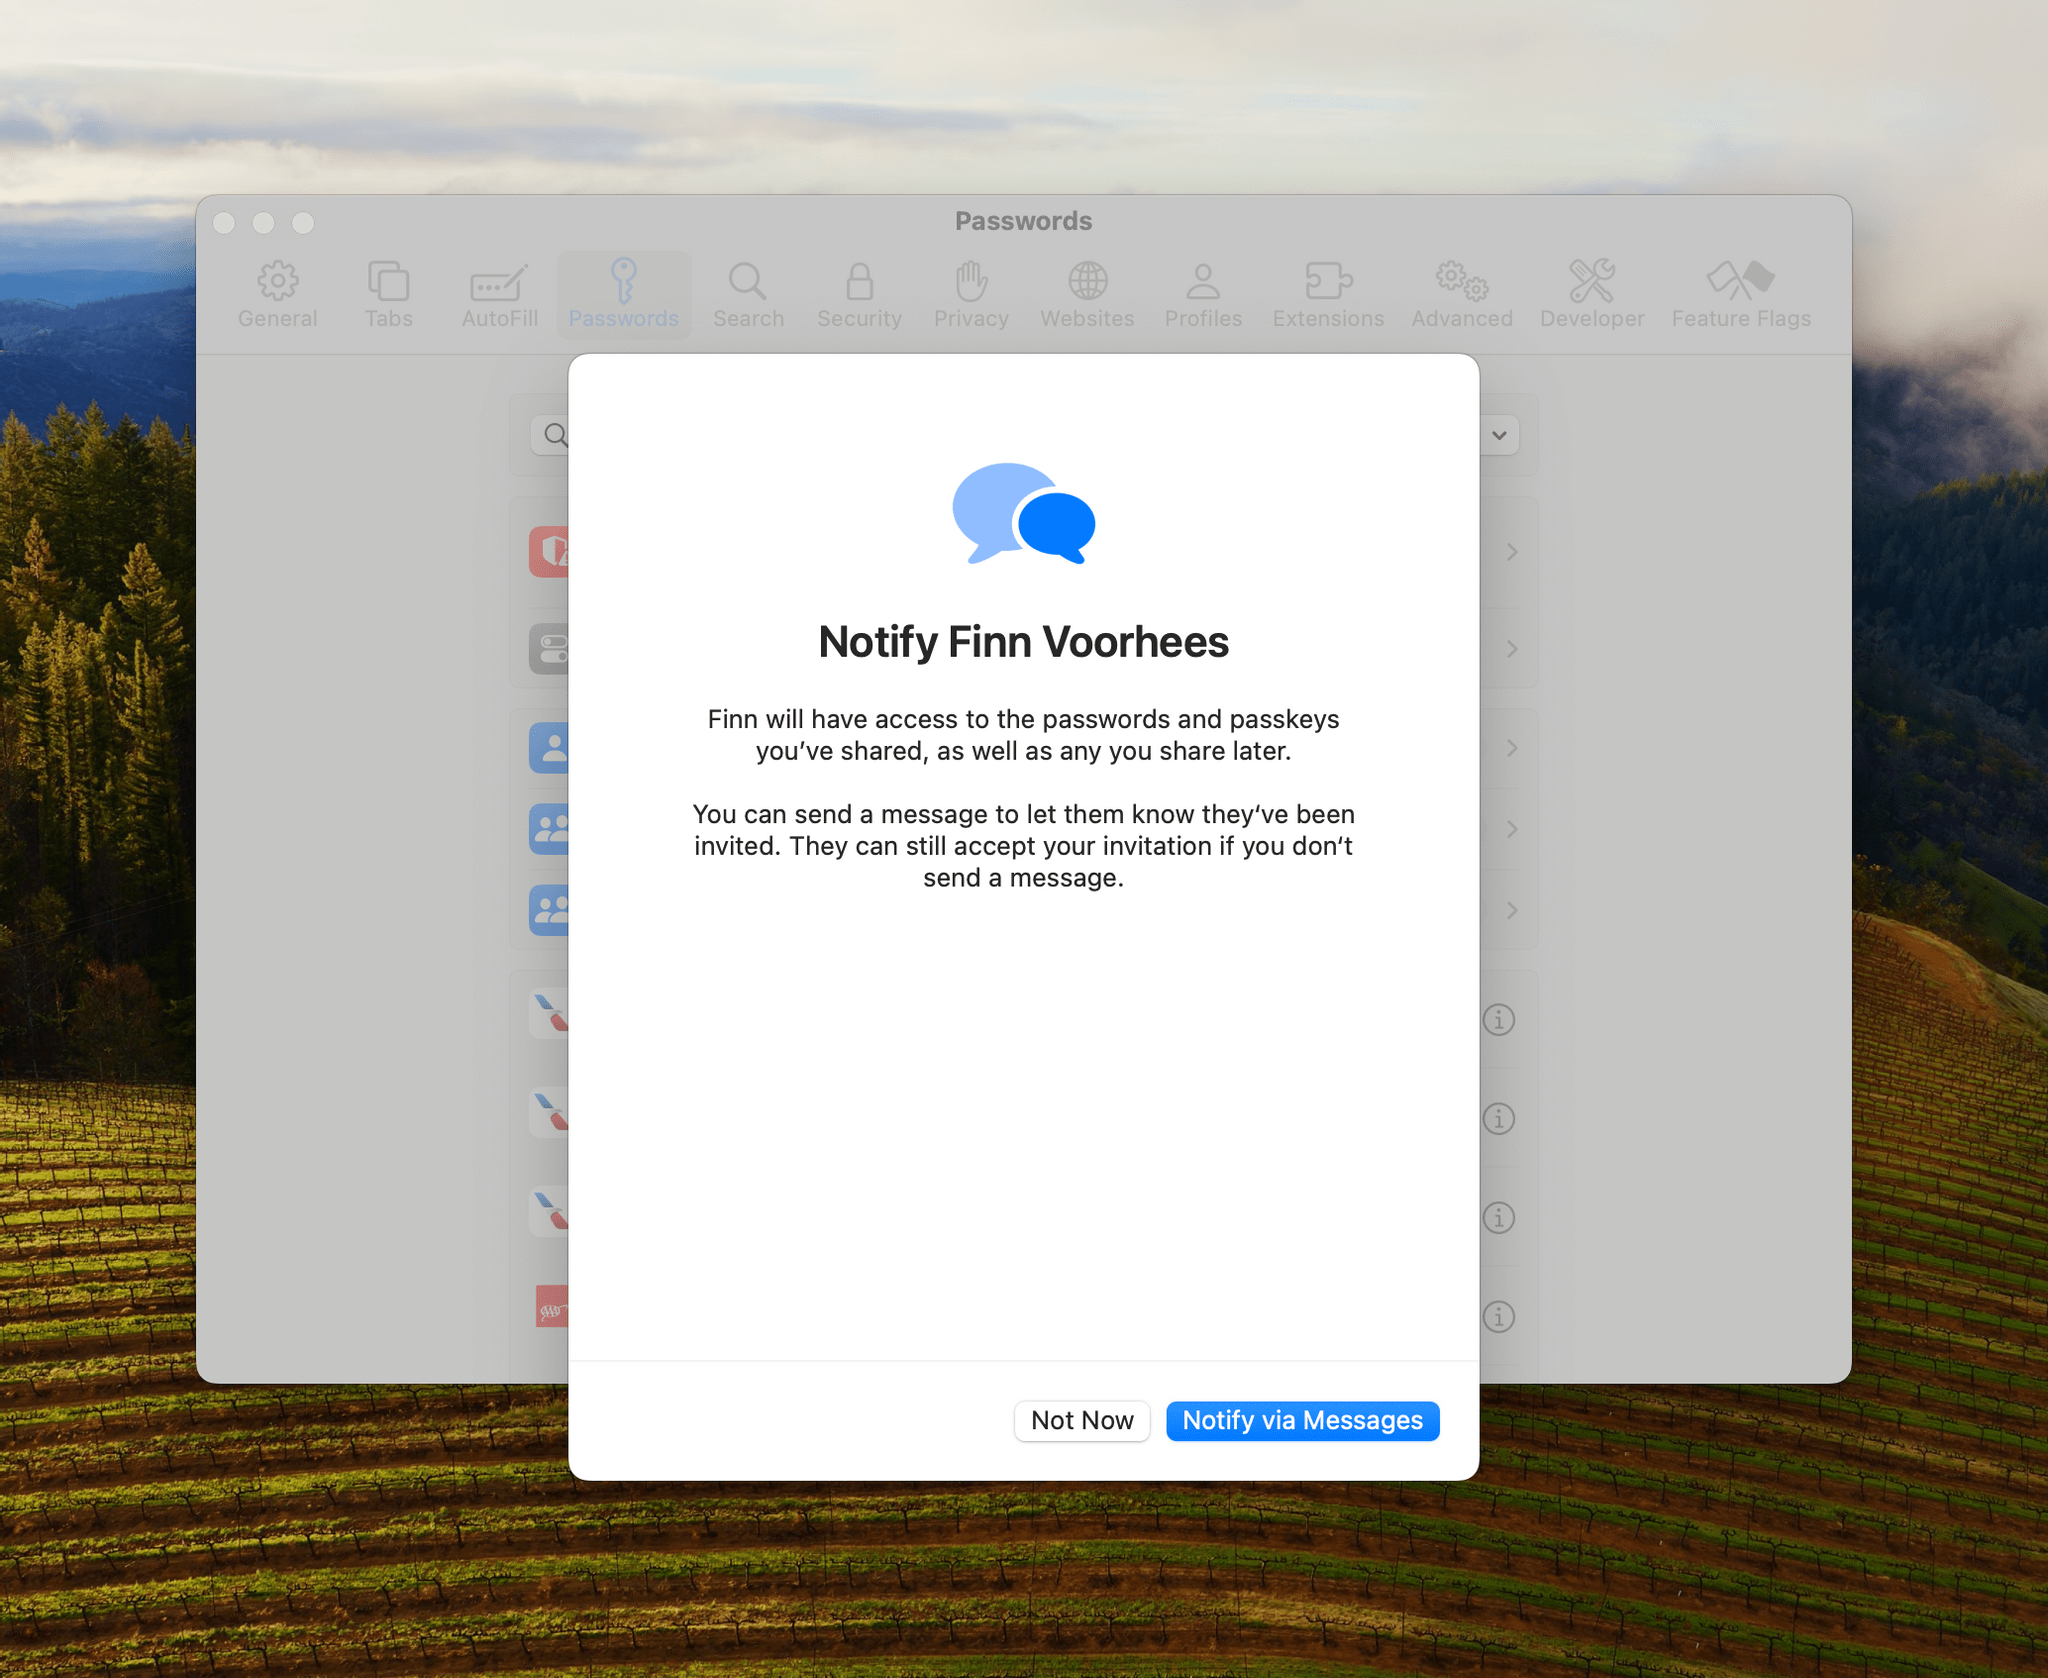 Notifying someone you've added to a password group is done using Messages.